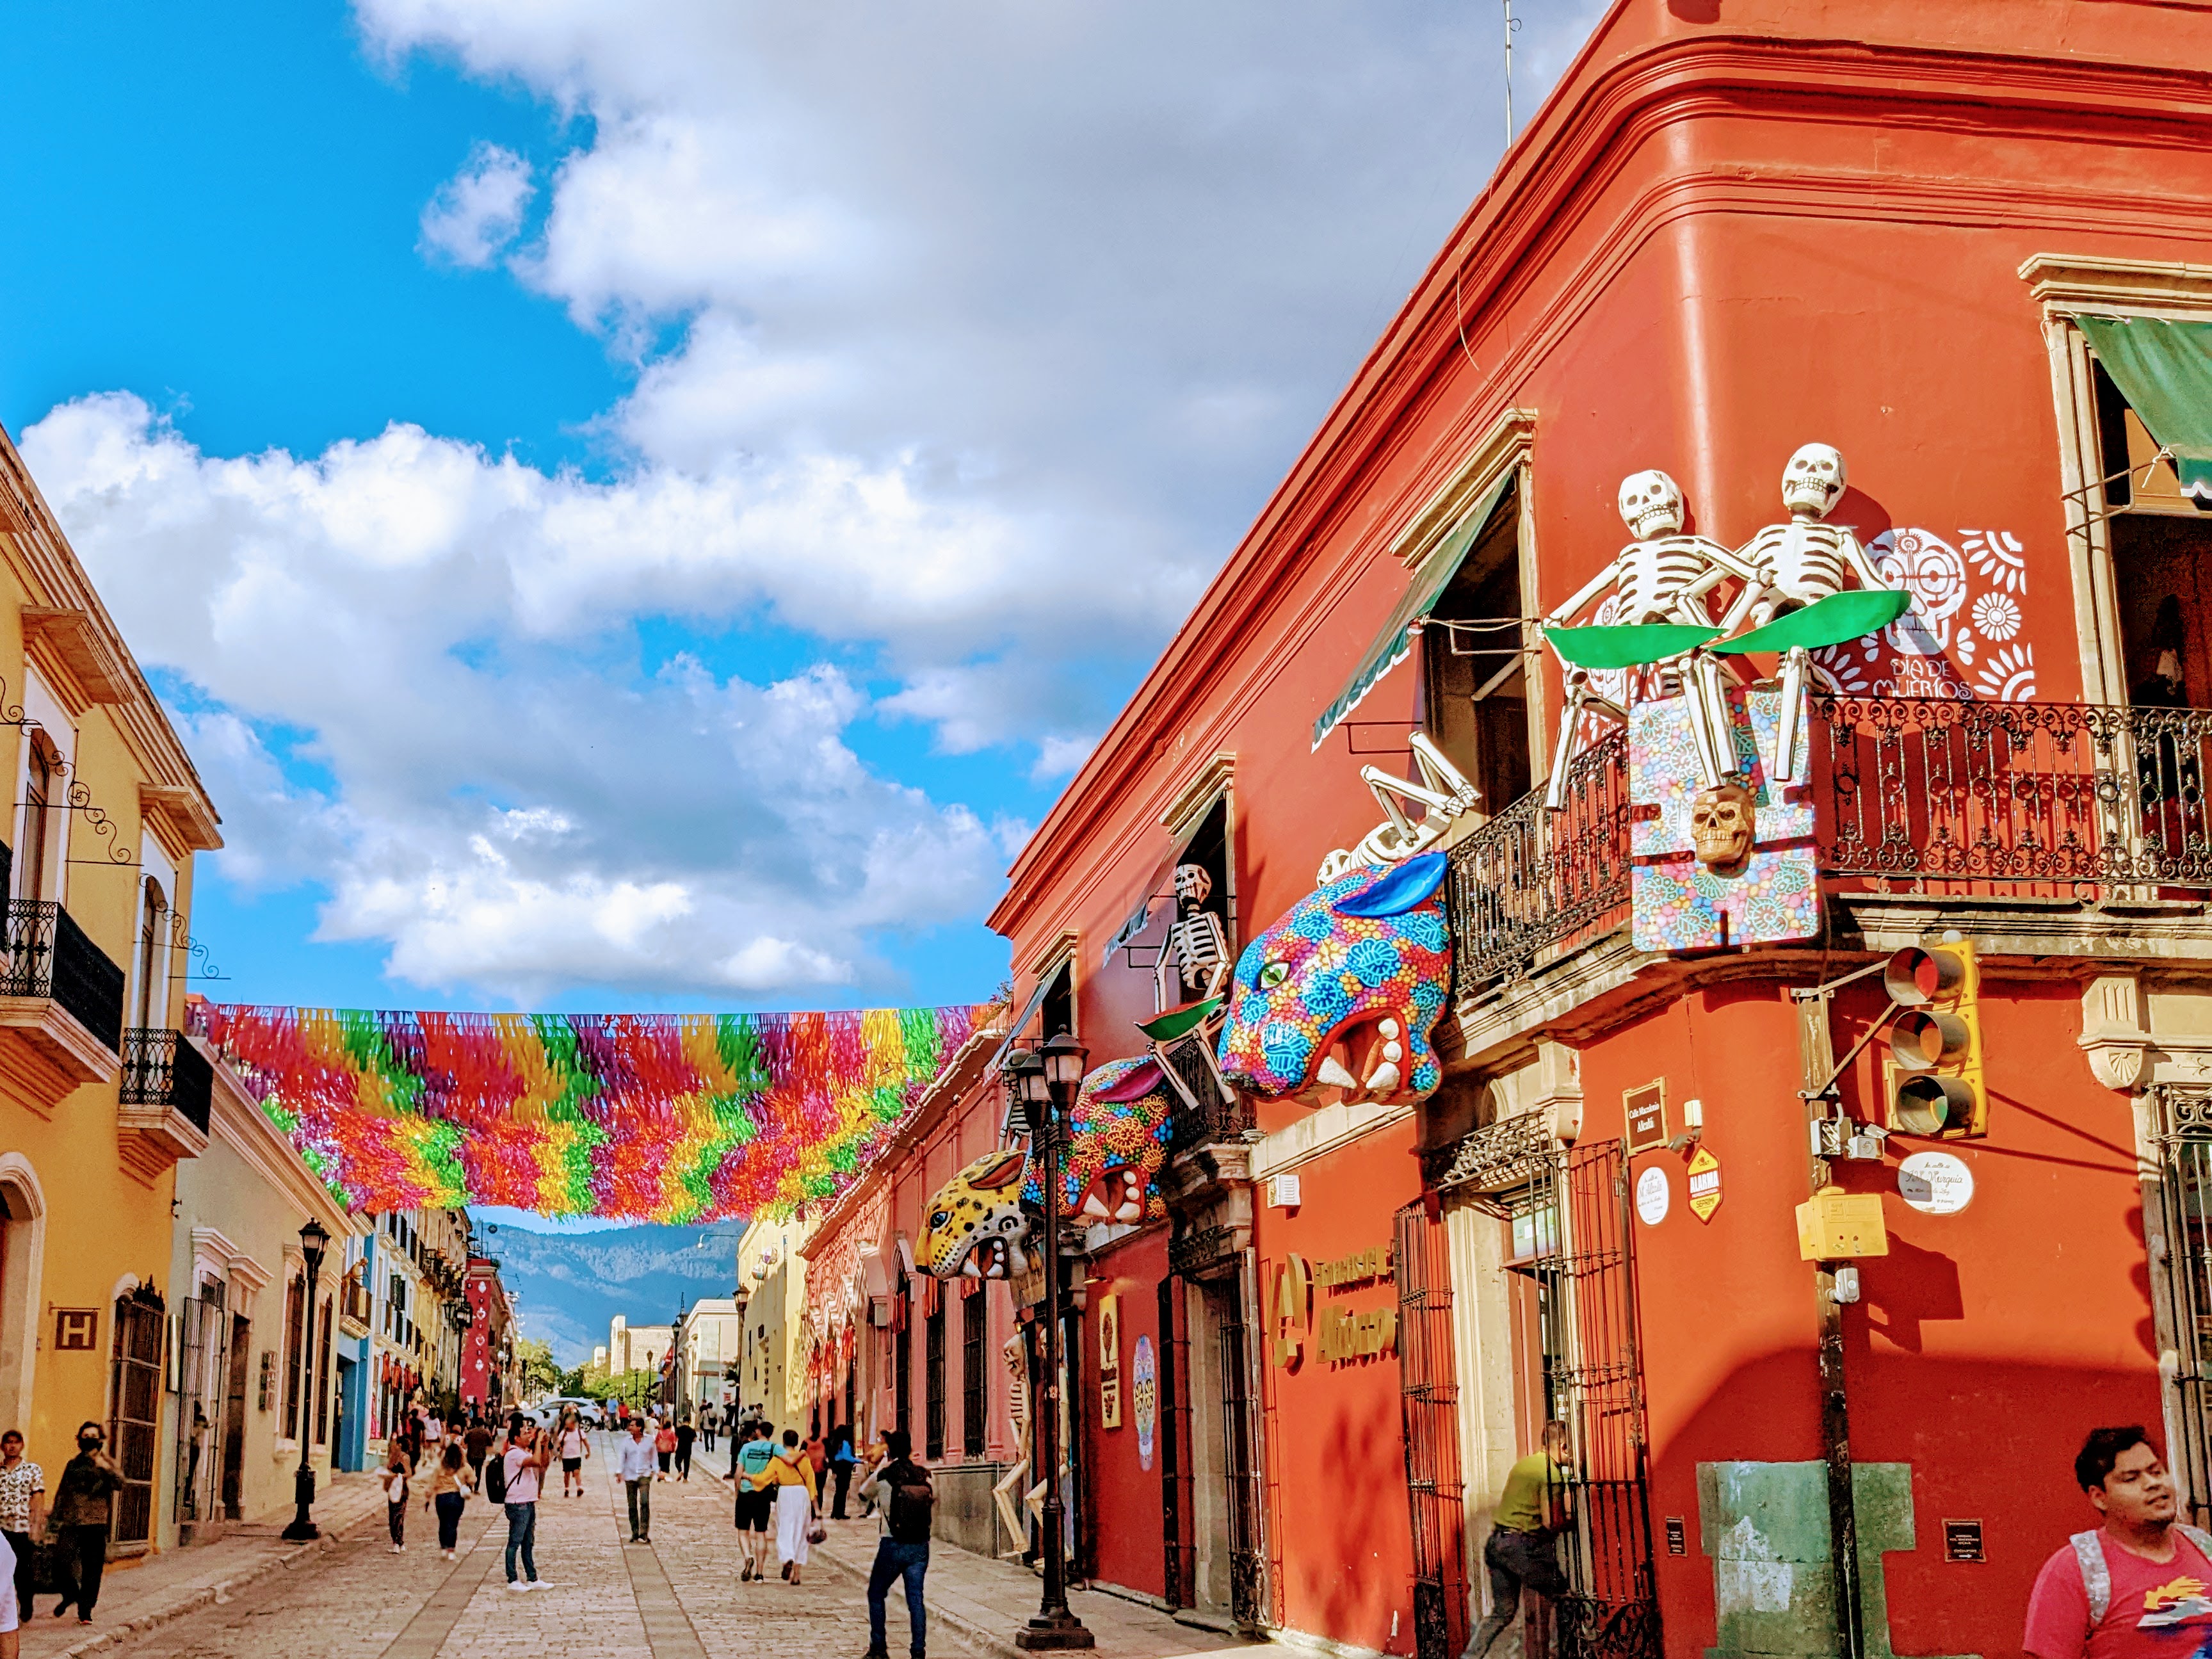 Walking the colorful streets of Oaxaca, Mexico; Photo: Tracey Coe 